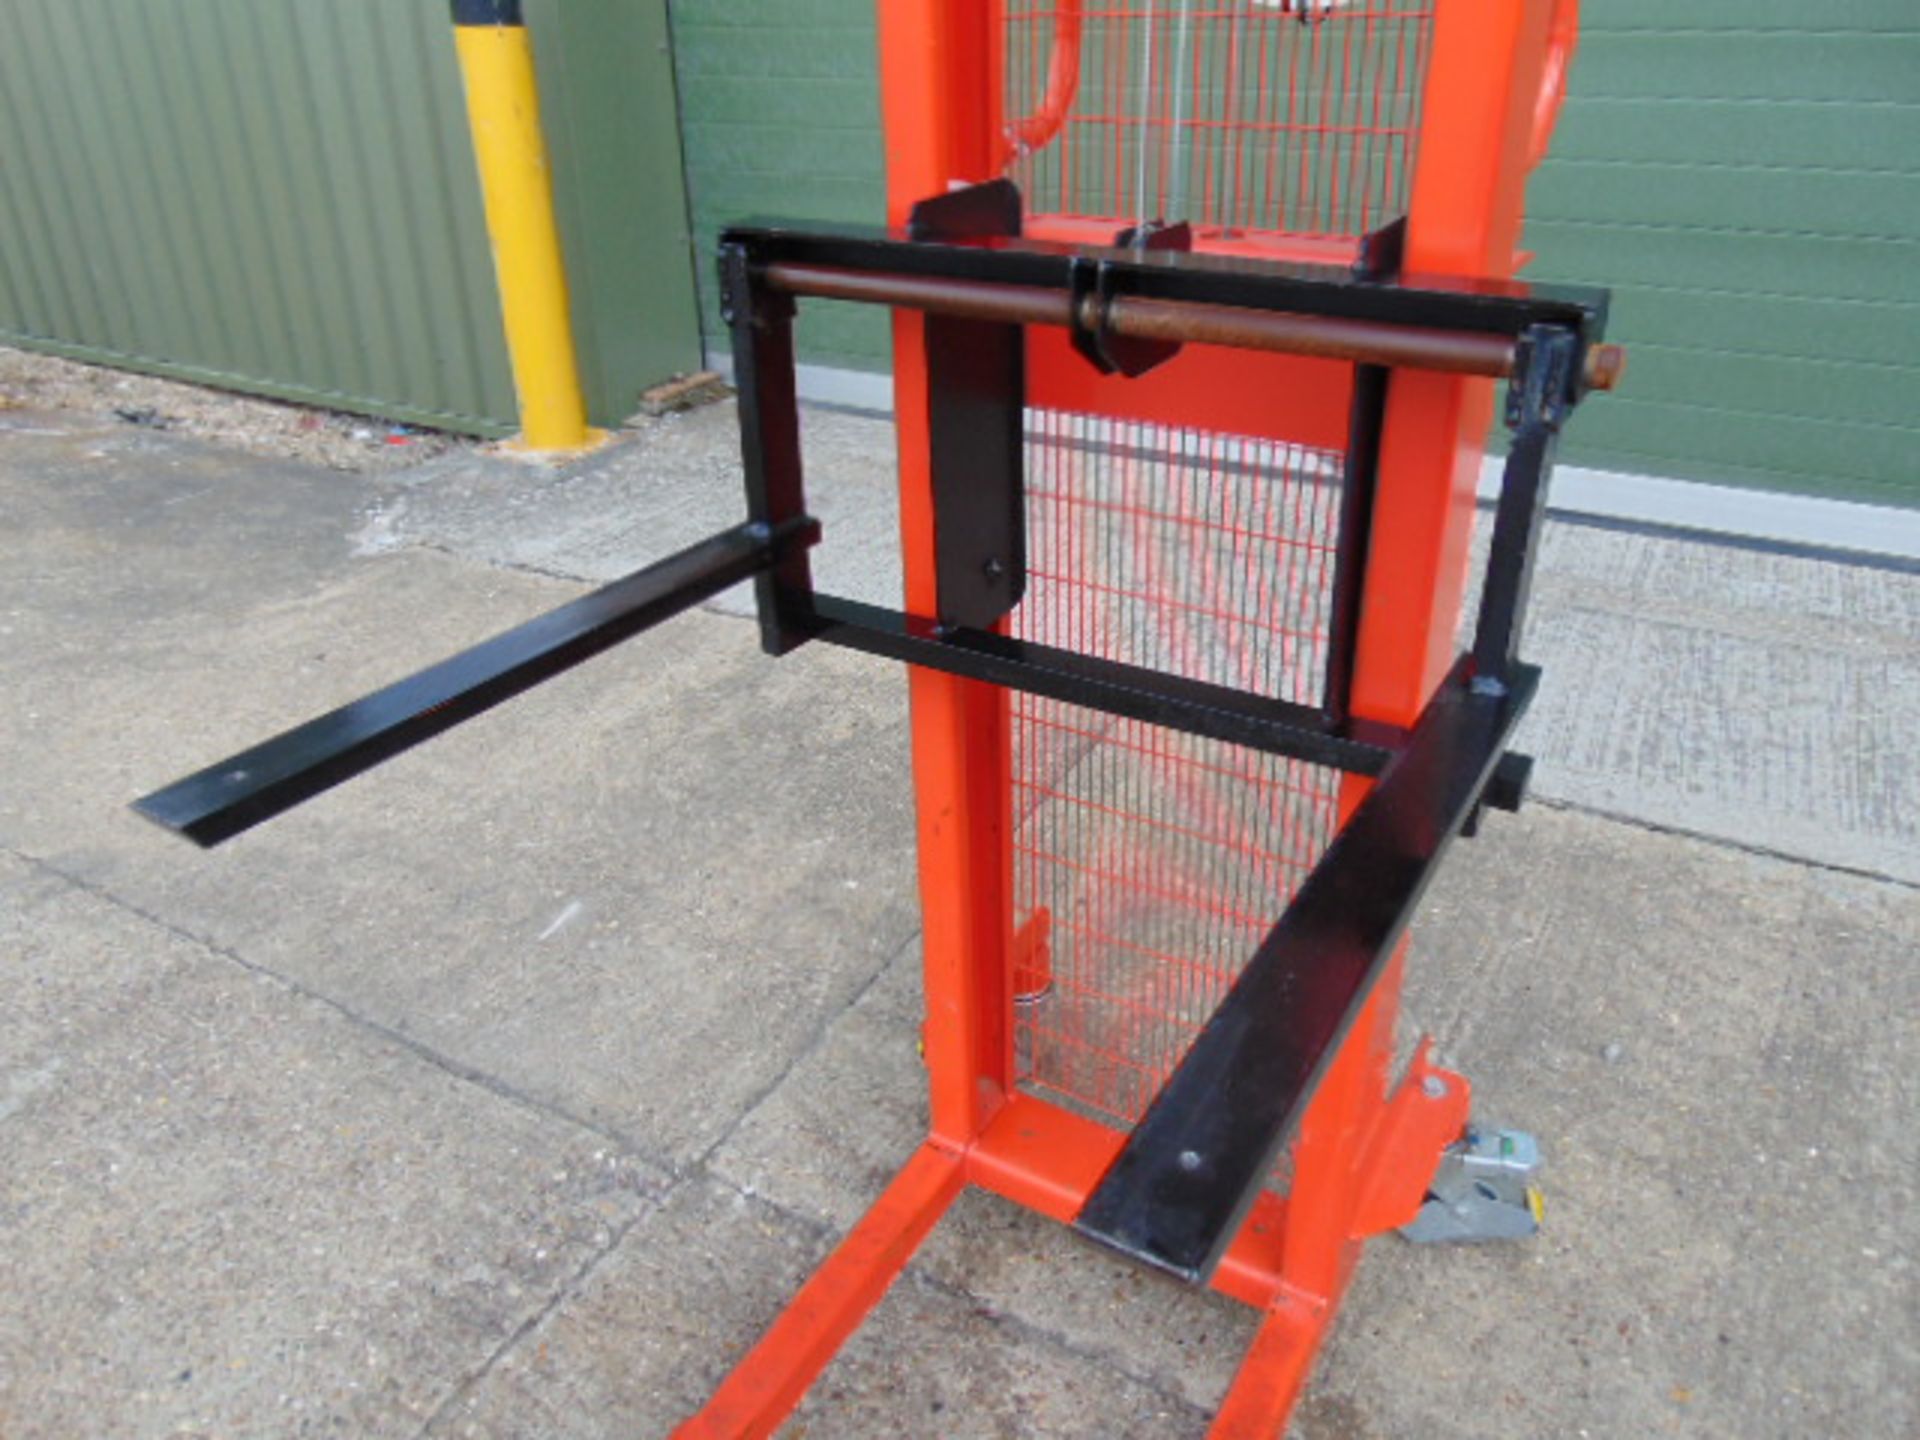 Advanced Handling 150 Kg Material Lift UNISSUED From MOD - Image 7 of 12